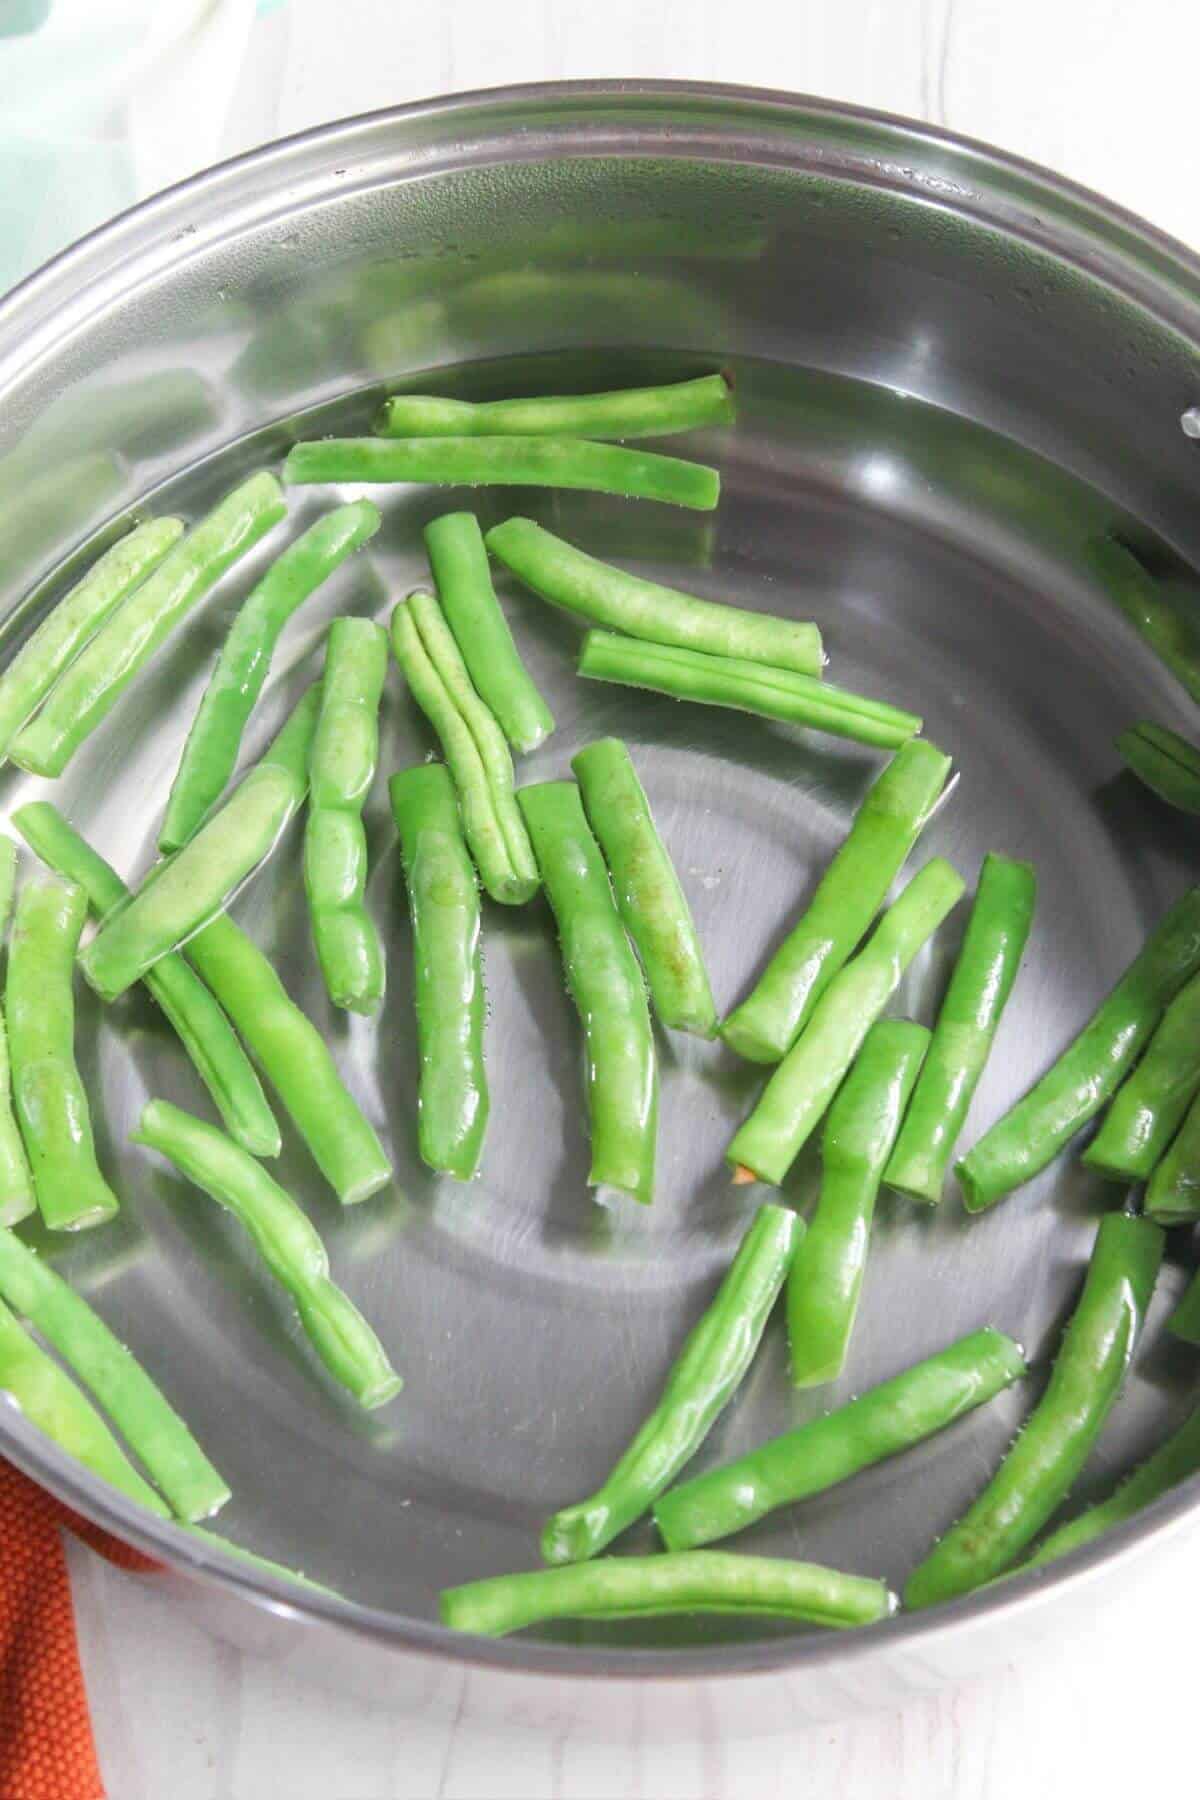 Green beans in a stainless steel pan.